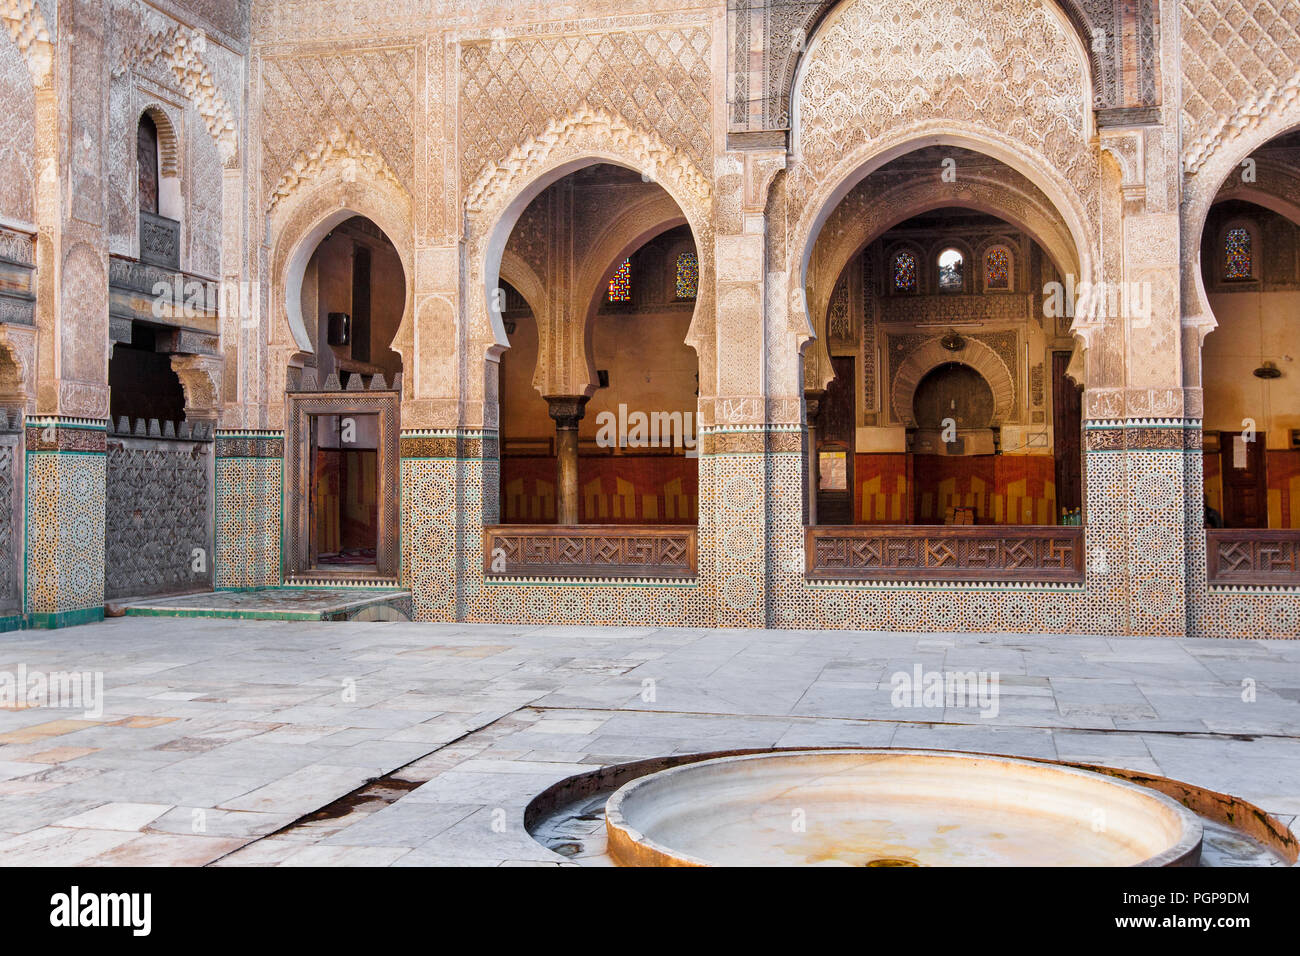 Moroccan mosque interior courtyard, with rows of arches featuring elaborate tiling and painted decoration. Location: Fes, Morocco Stock Photo